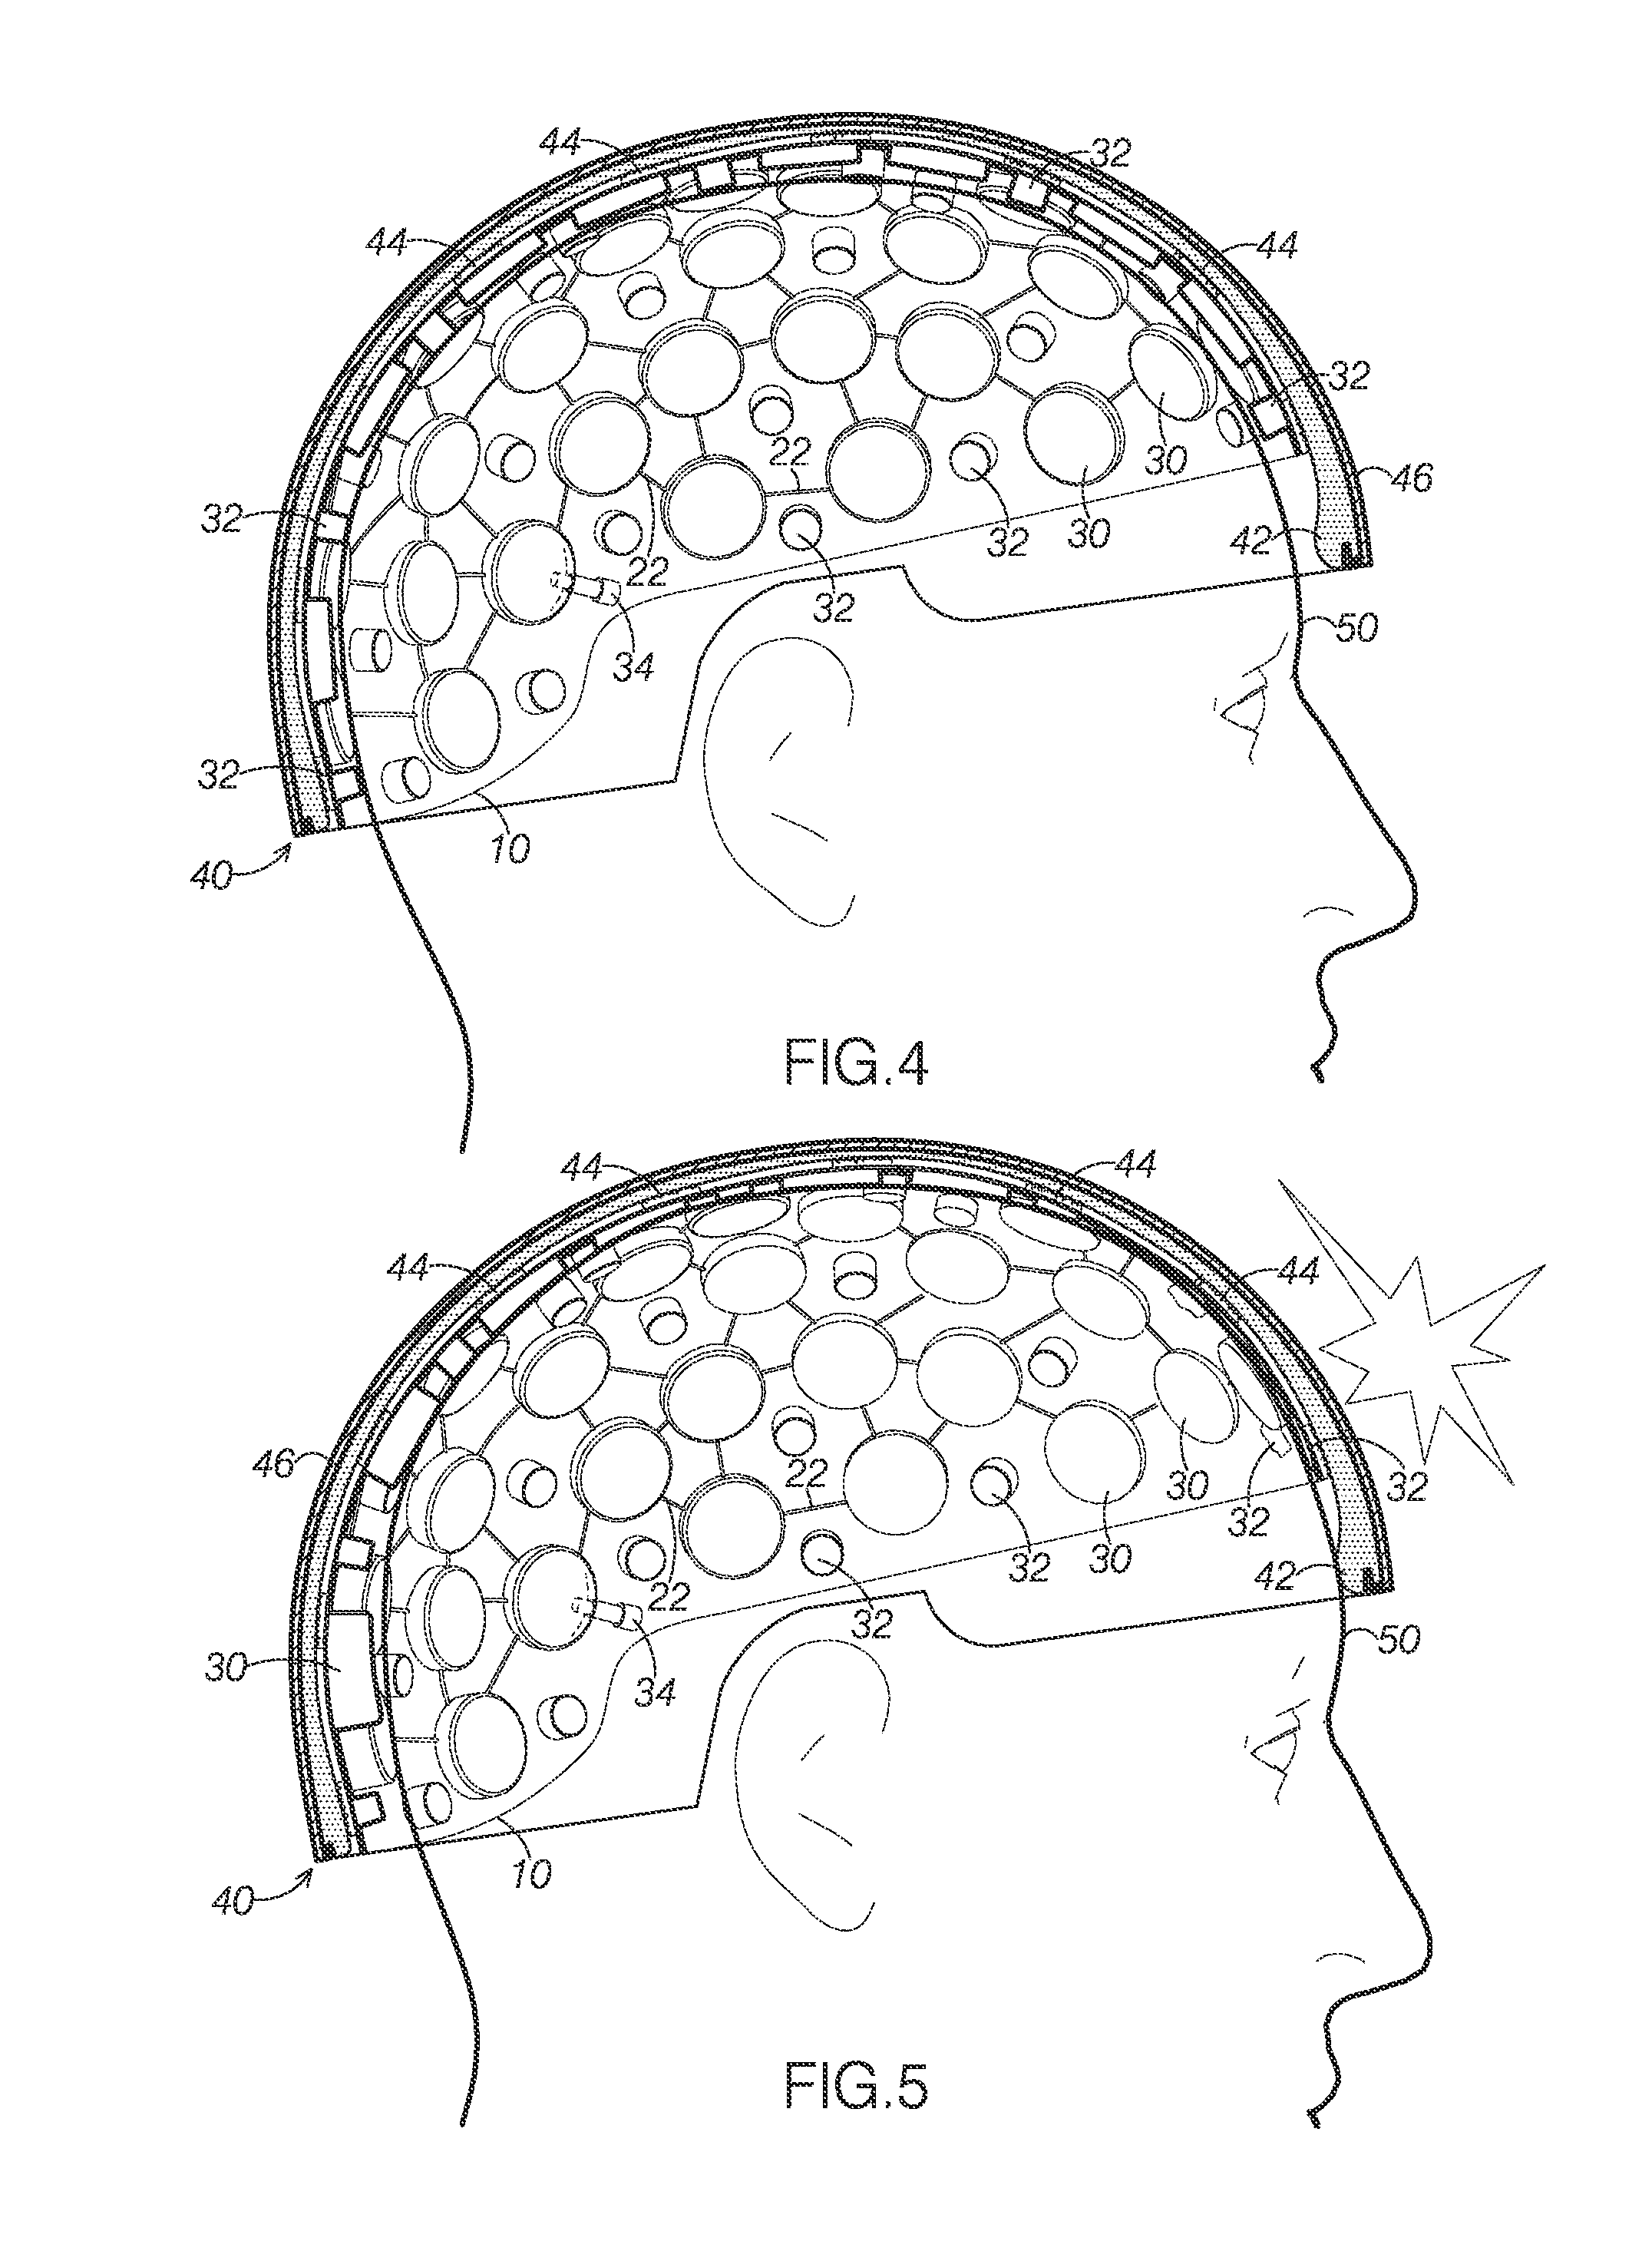 Rebound-dampening headgear liners with positioning feature